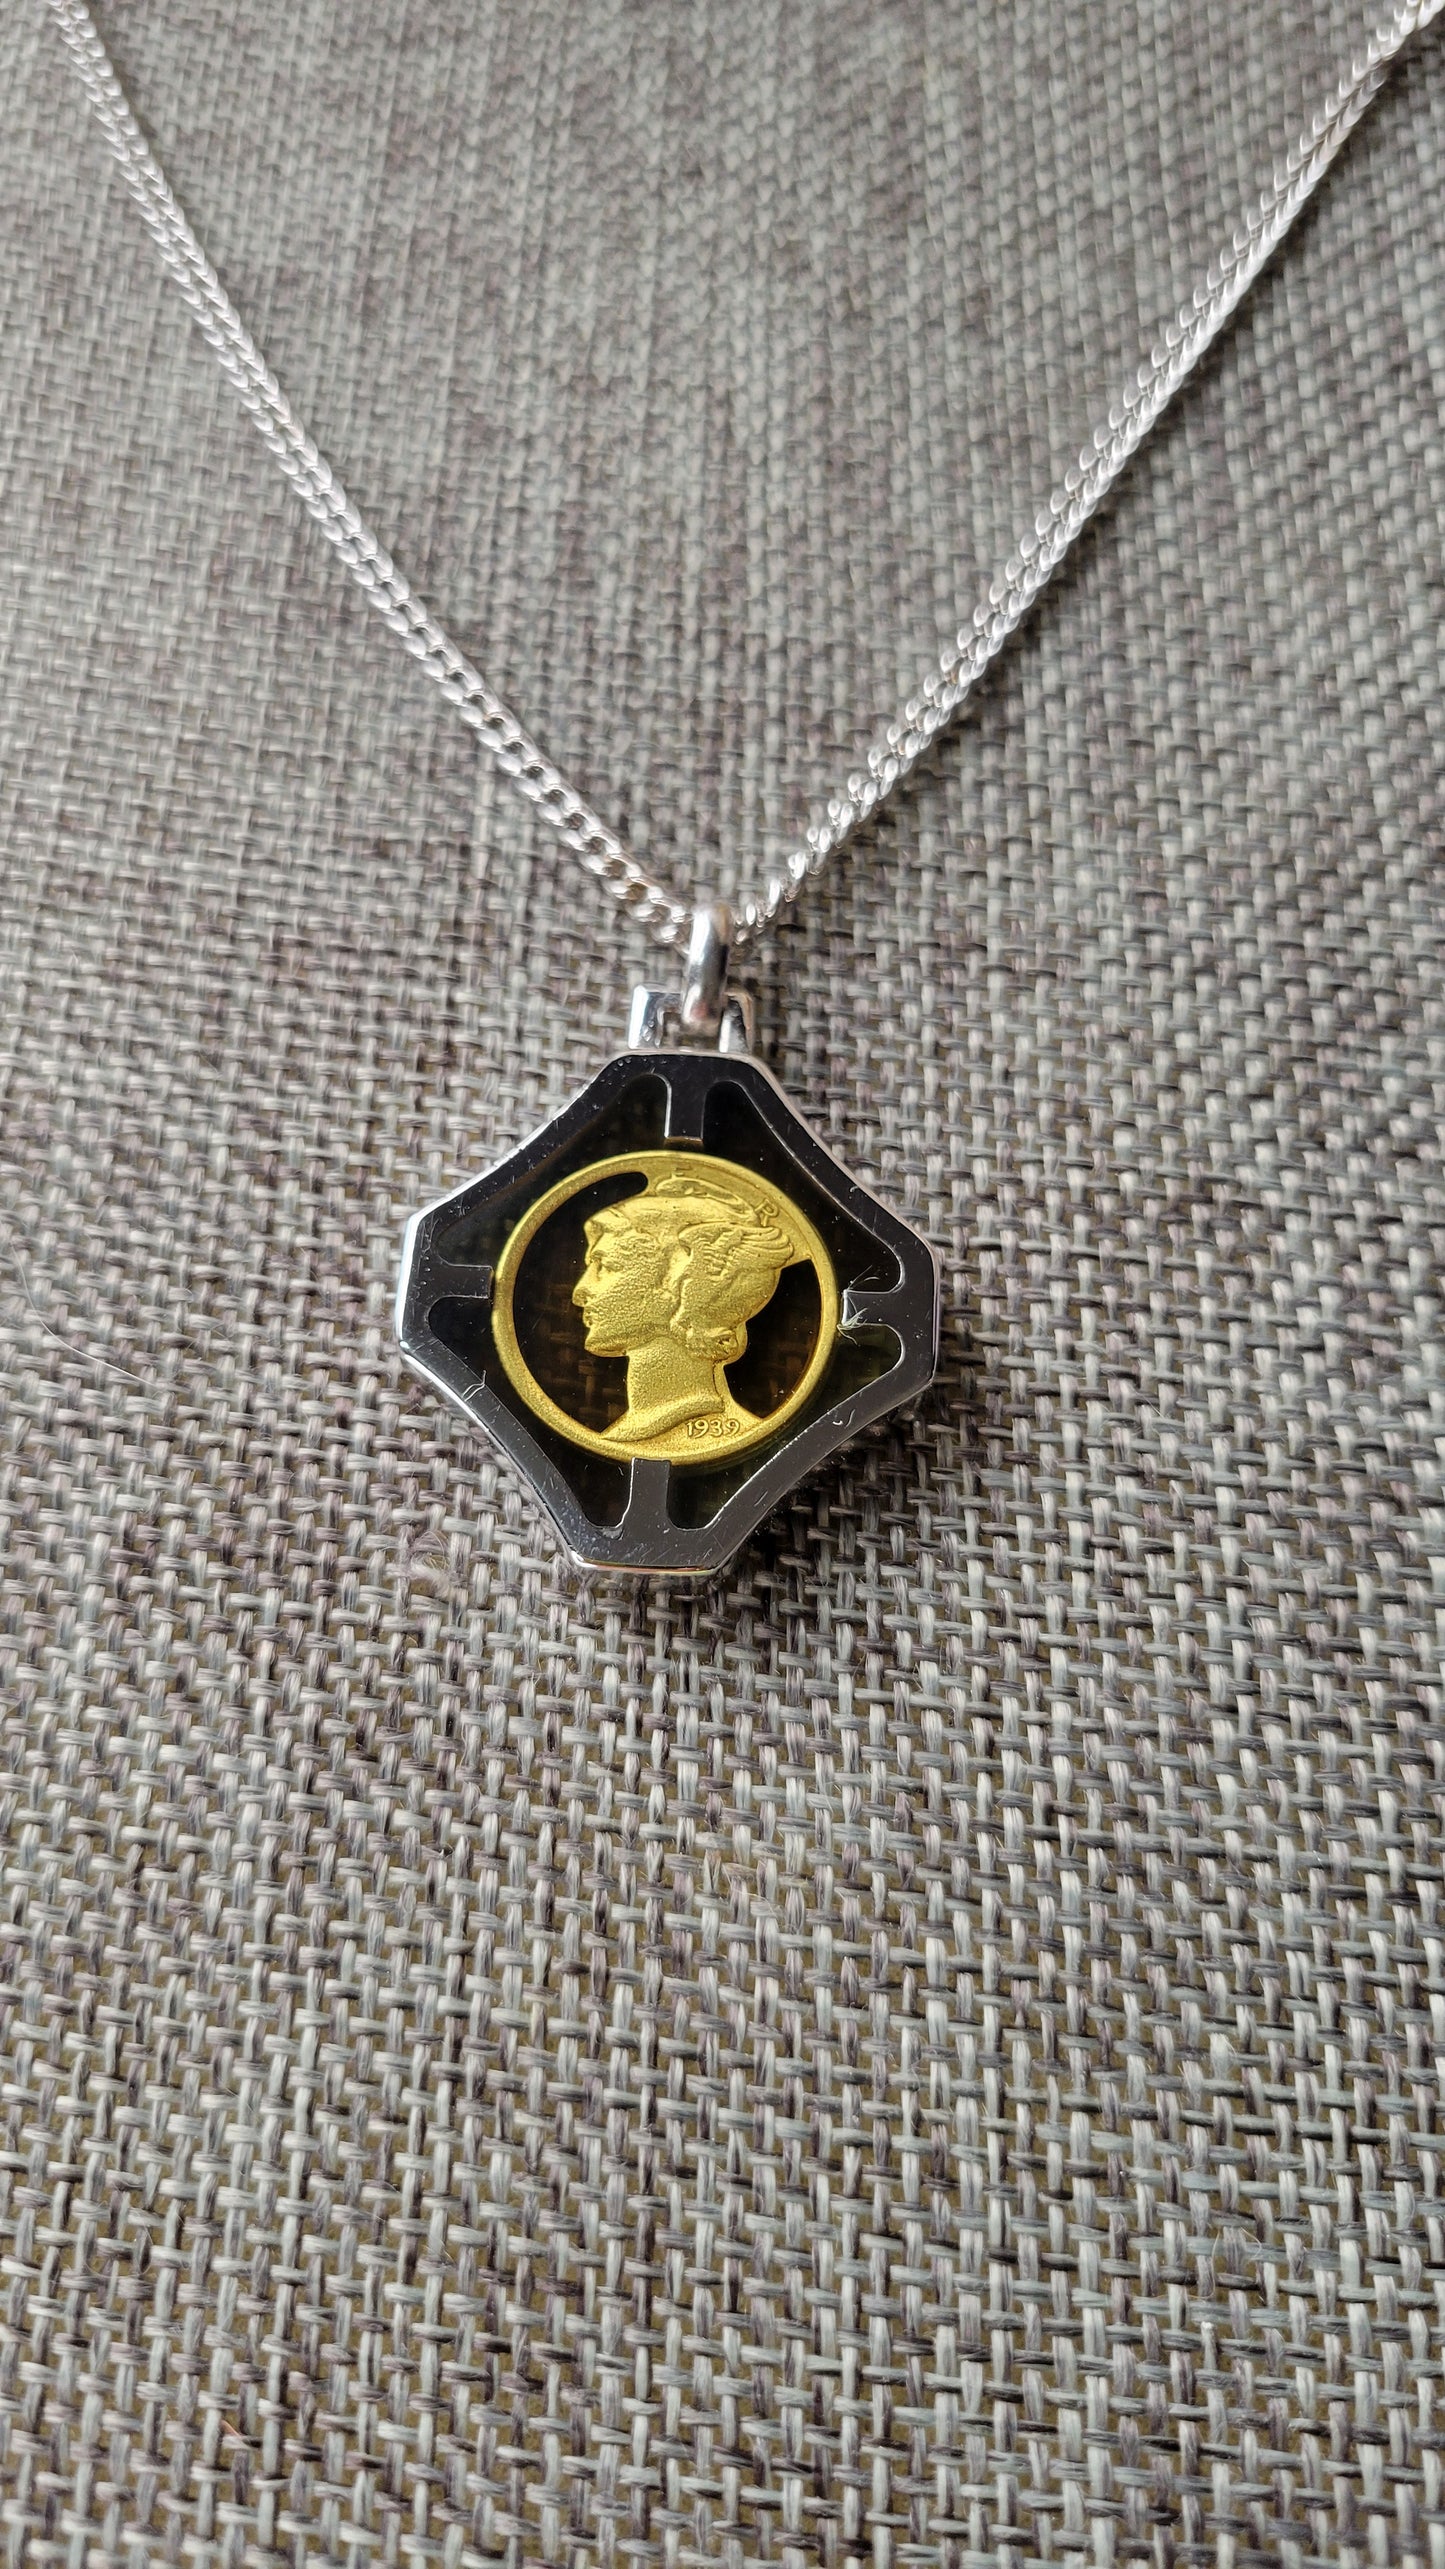 Gilded Mercury dime cut-out in resin pendant necklace on 18" silver-tone chain